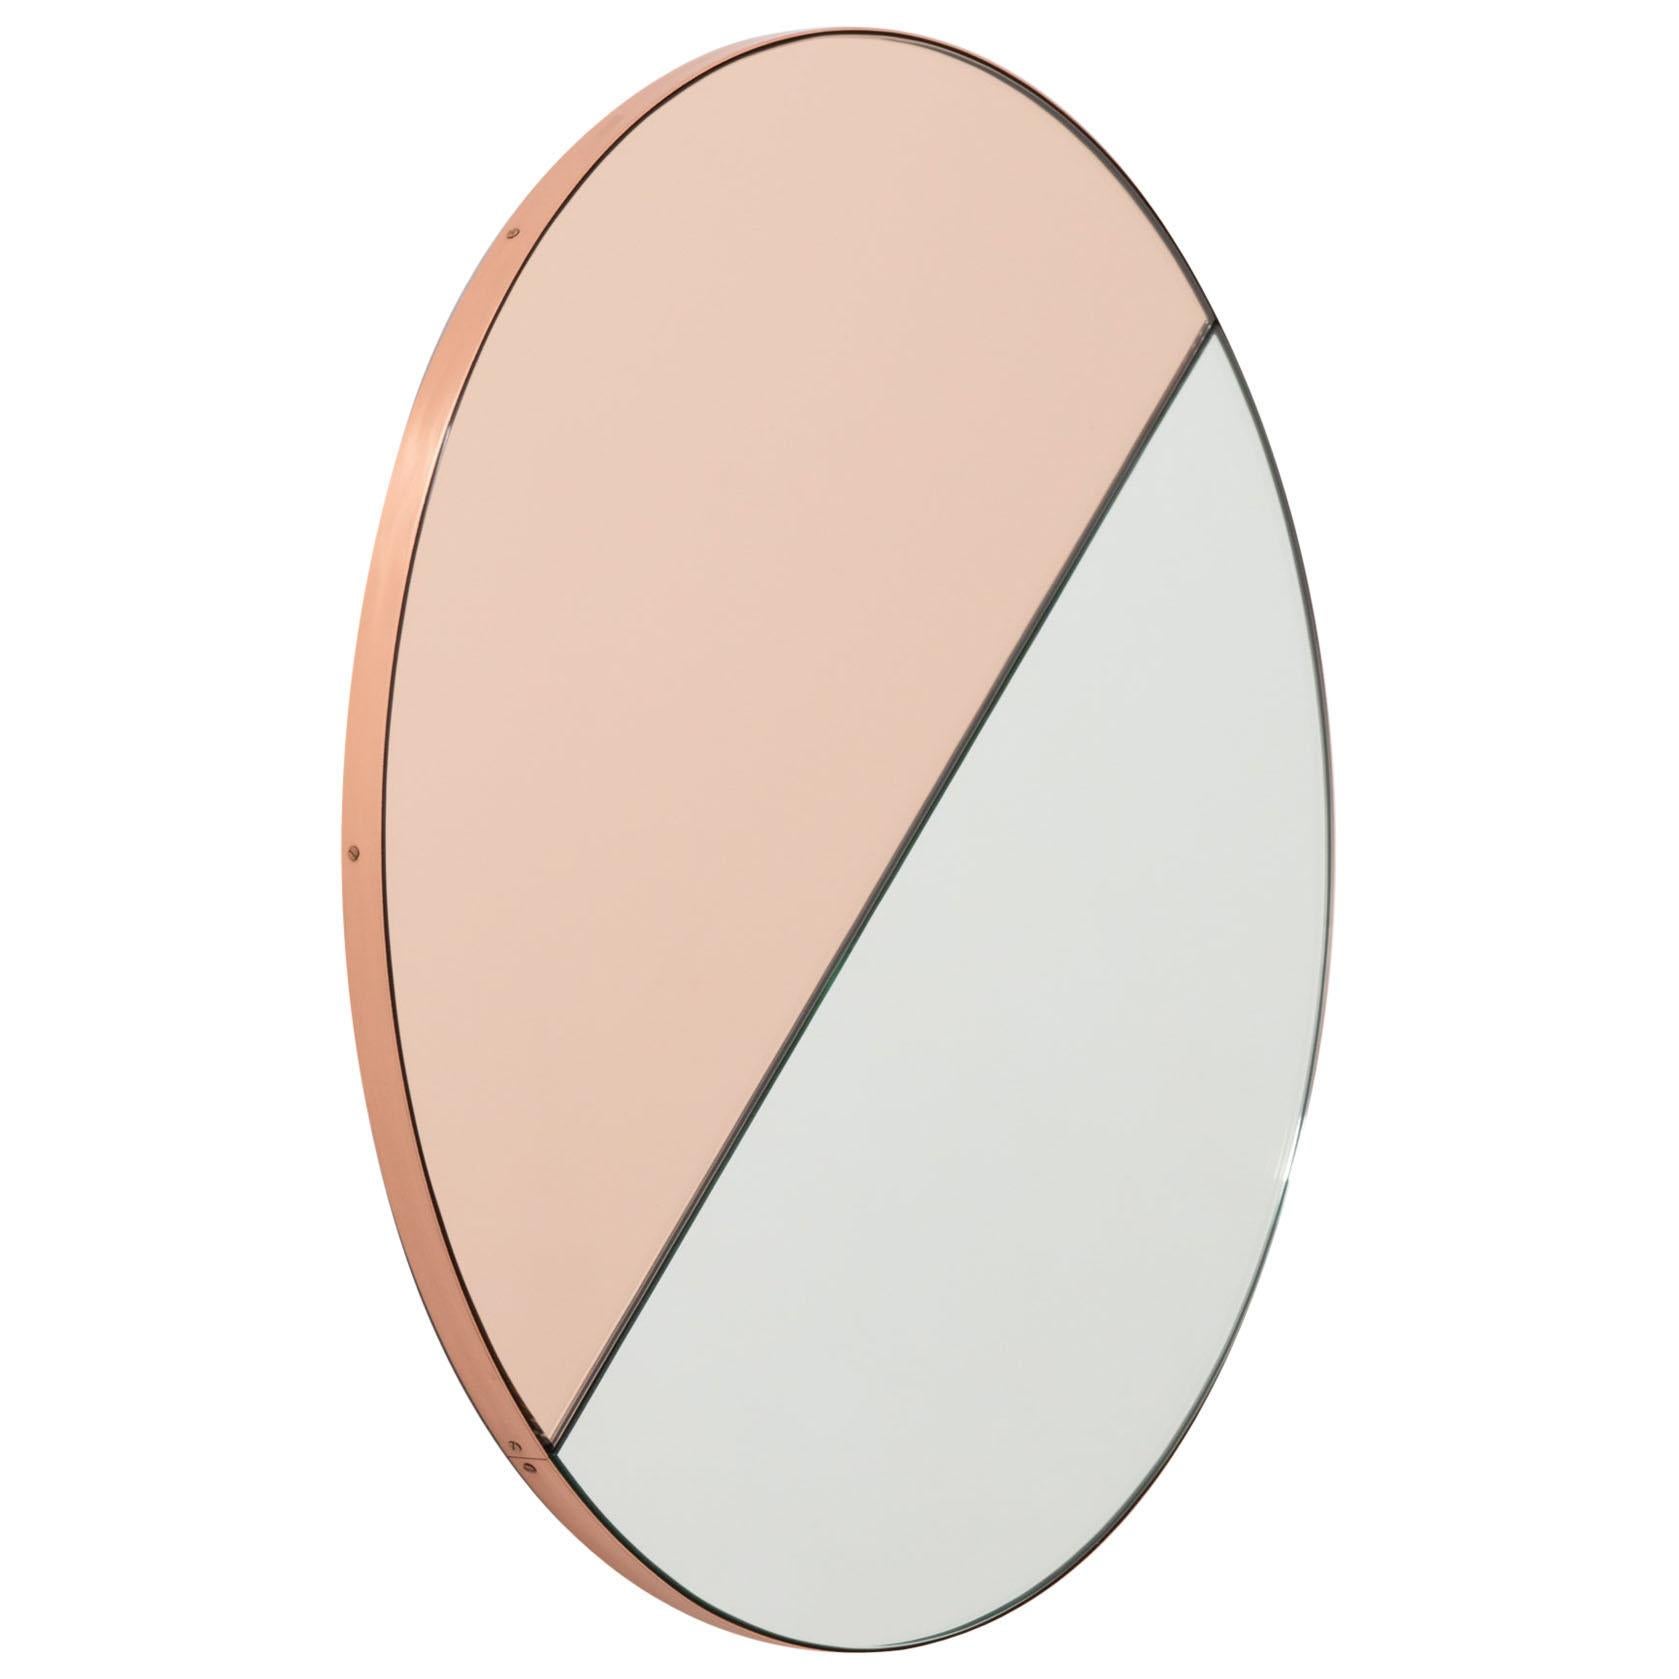 Orbis Dualis Mixed Rose Gold Tint Contemporary Round Mirror, Copper Frame, Small